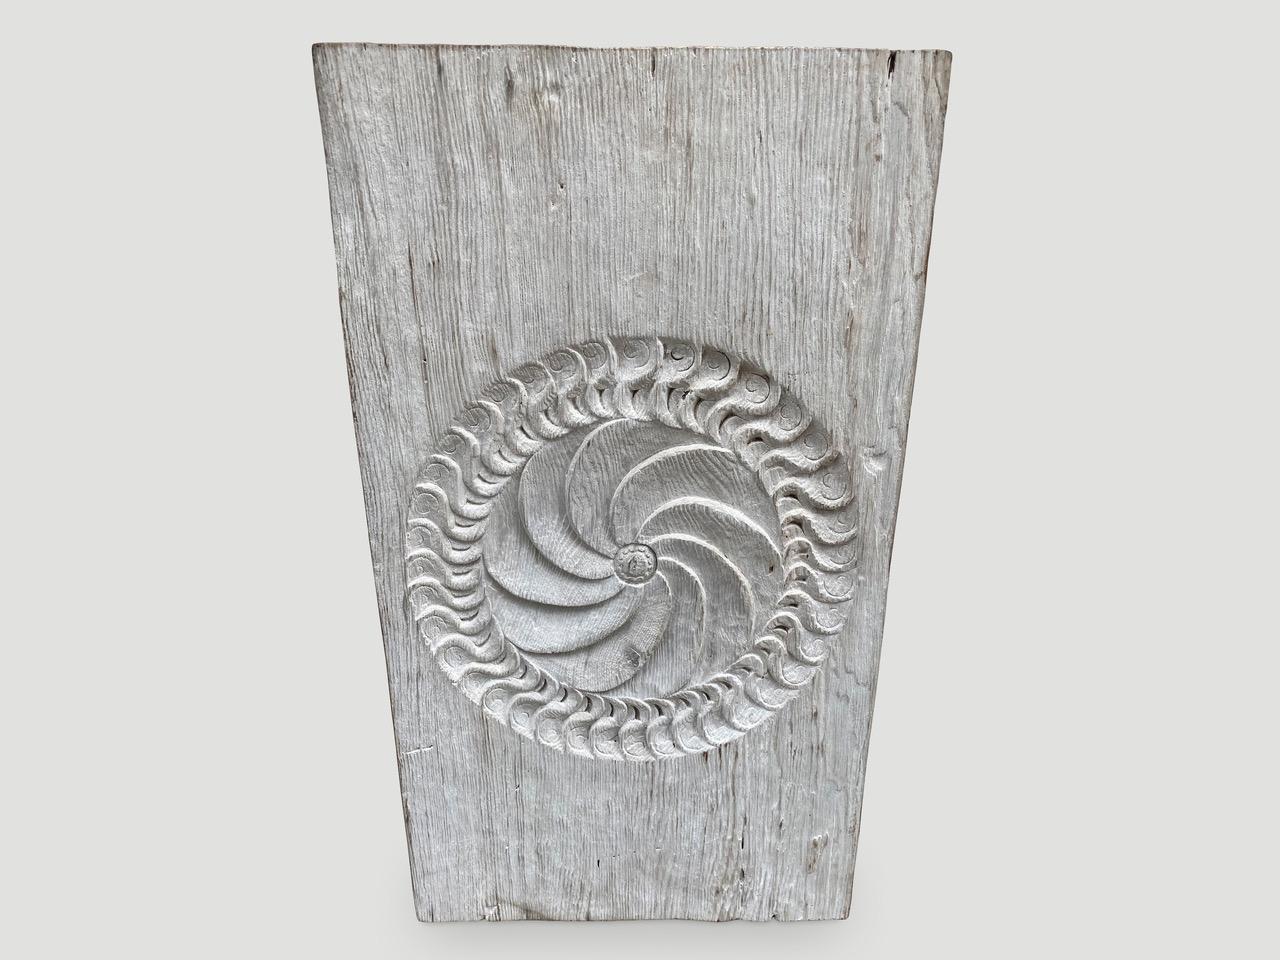 Antique hand carved merbau wood panel from Lampung, Sumatra. We have a collection in various sizes all white washed. Please inquire. The size and price reflect the one shown. Stunning on both sides.

This panel was sourced in the spirit of wabi